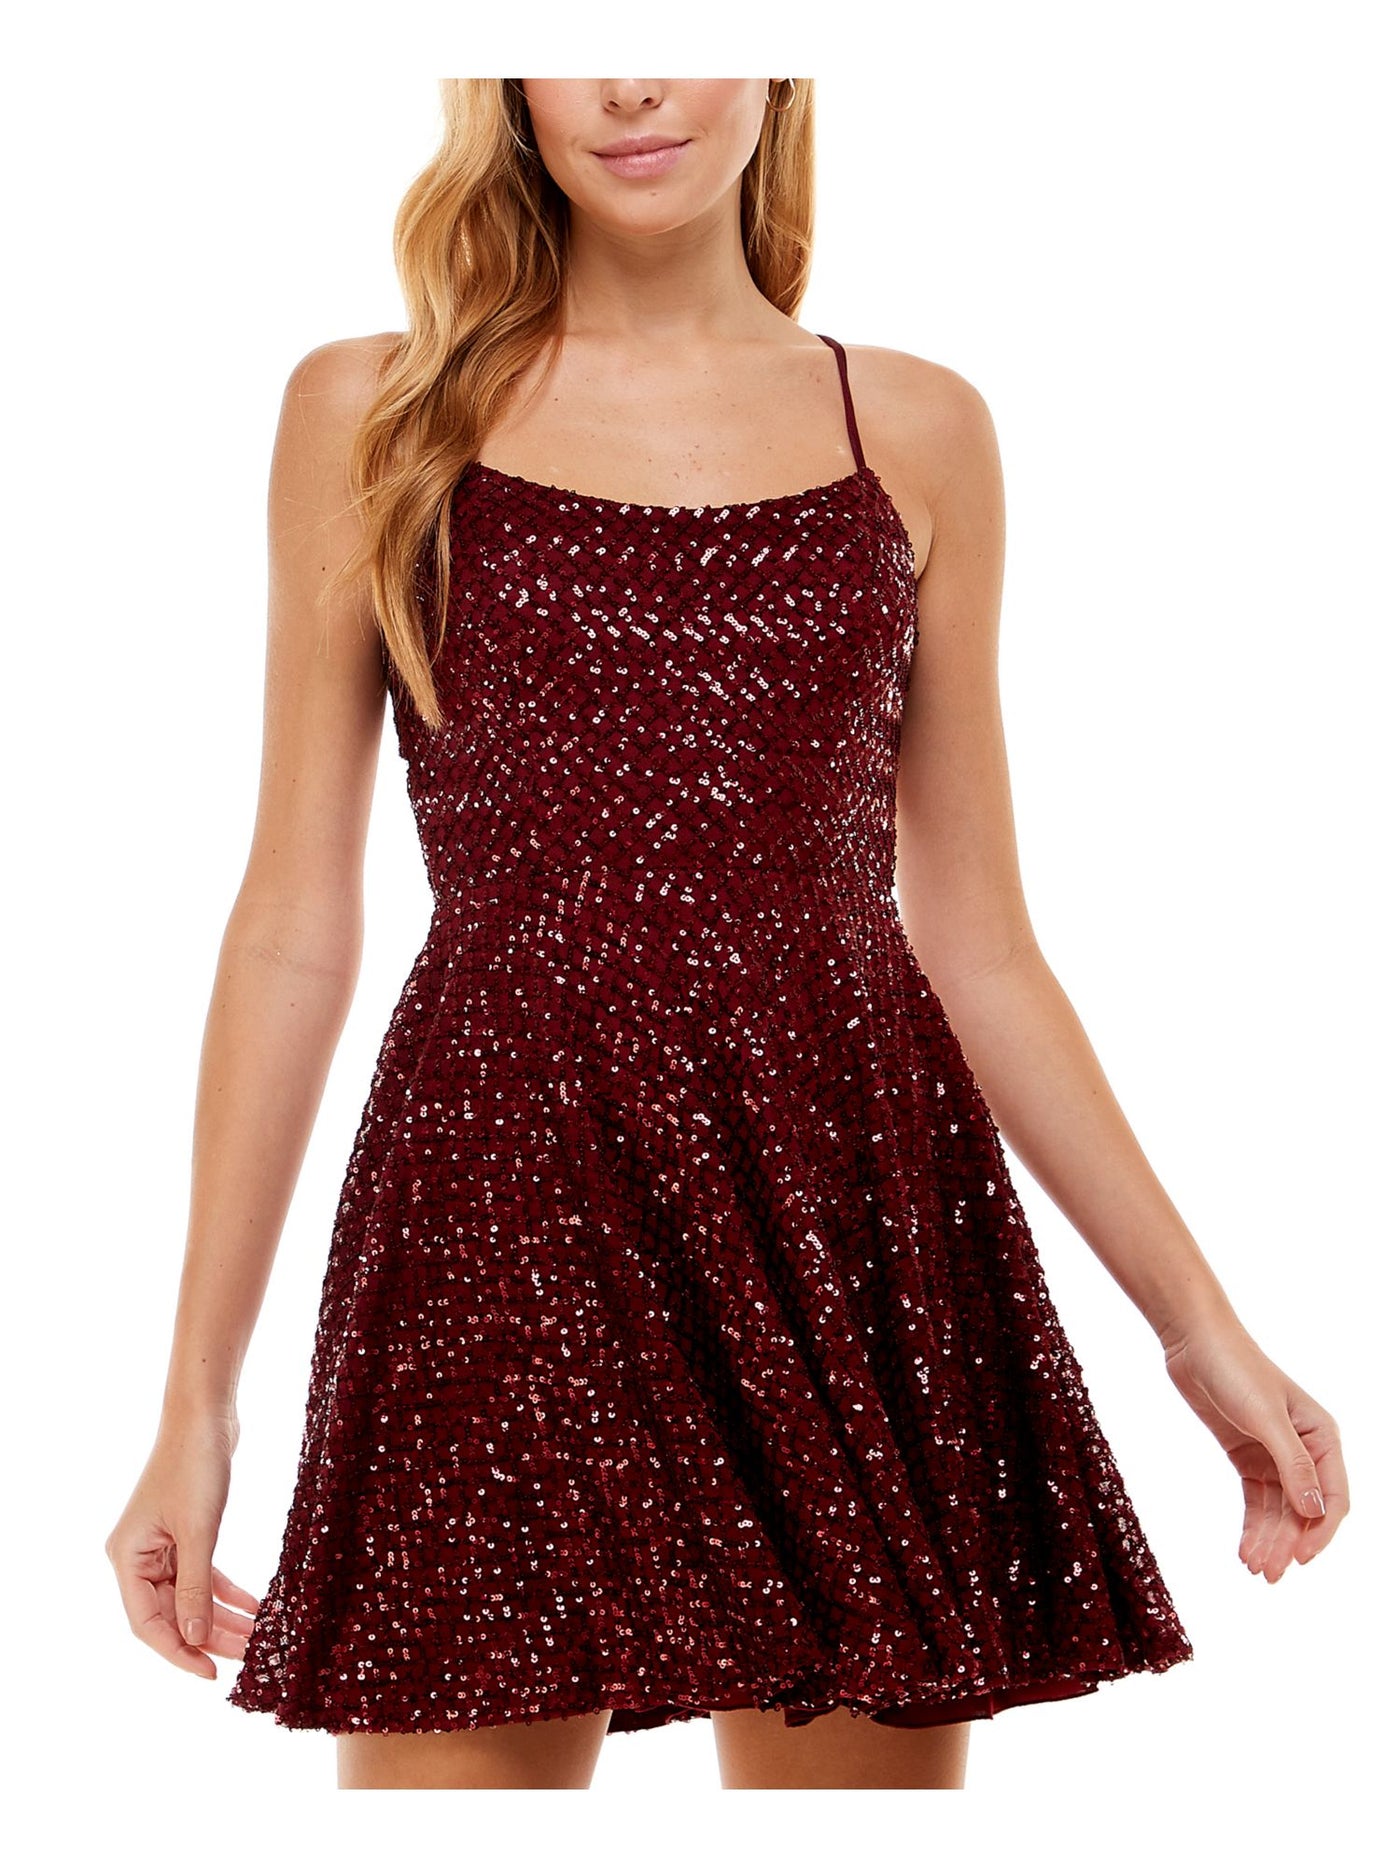 CITY STUDIO Womens Burgundy Stretch Sequined Zippered Lace-up Tie Back Padded Cups Spaghetti Strap Scoop Neck Short Party Fit + Flare Dress Juniors 13